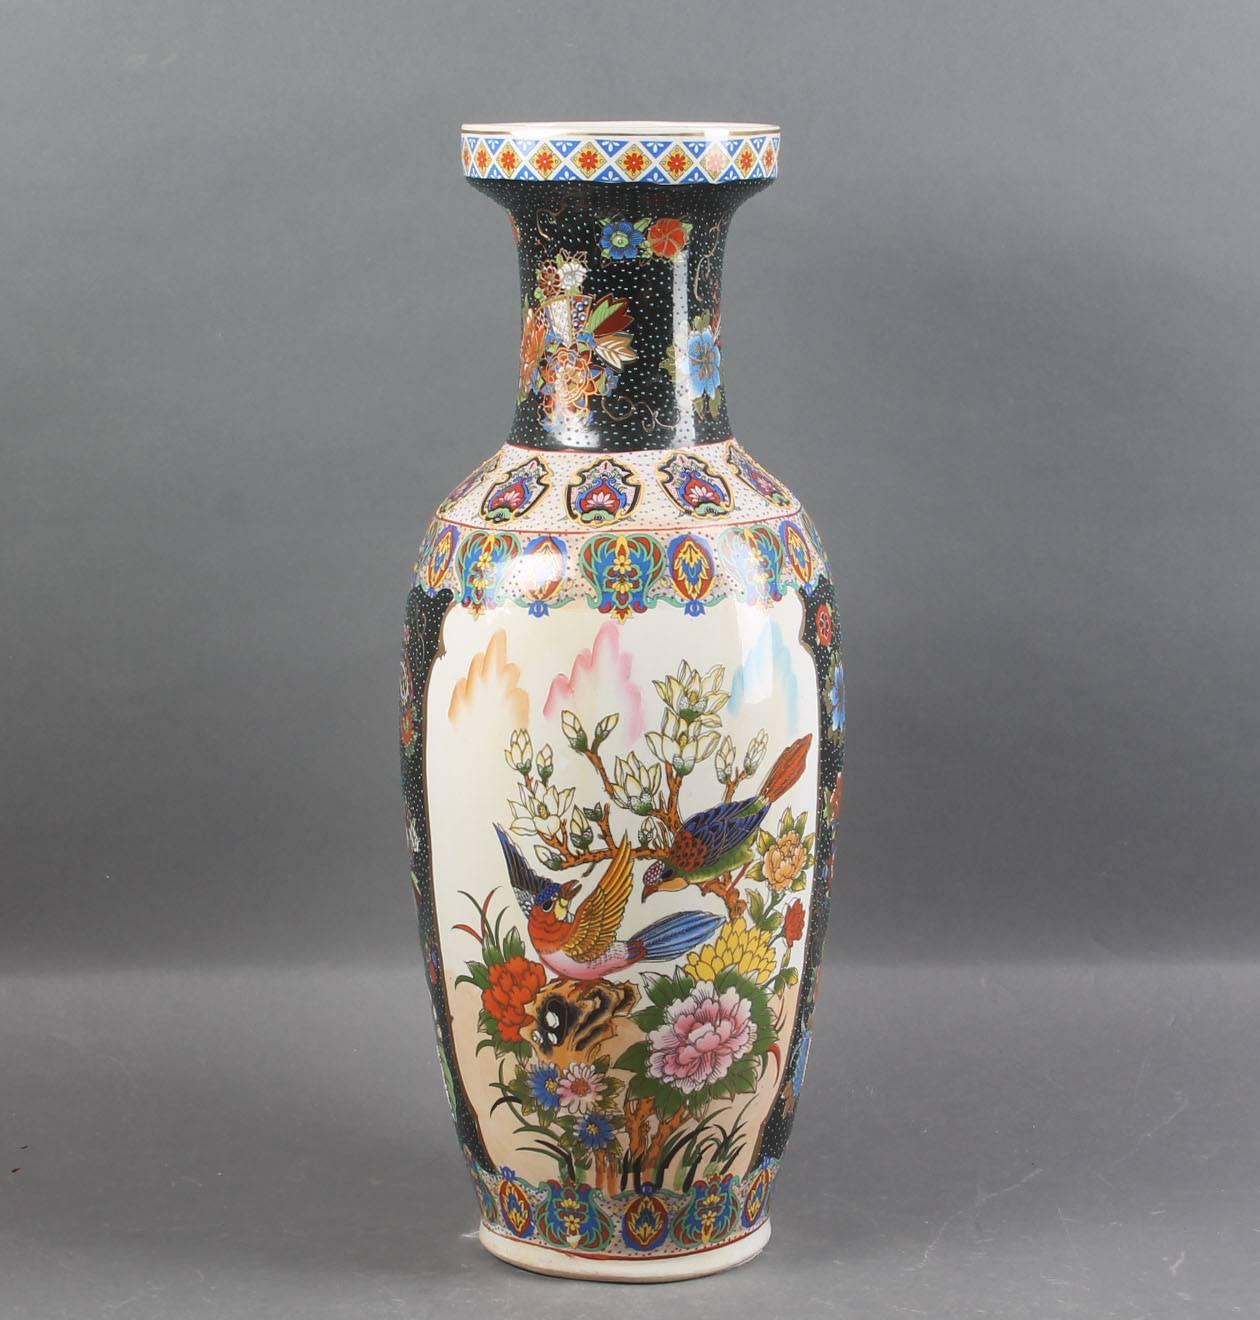 Chinese vase of porcelain decorated with flowers on the white and black bottom, fields with motifs in the form of birds, form the late 20th century.
Measures: H 61 cm. There is a small drop of glaze at the neck.